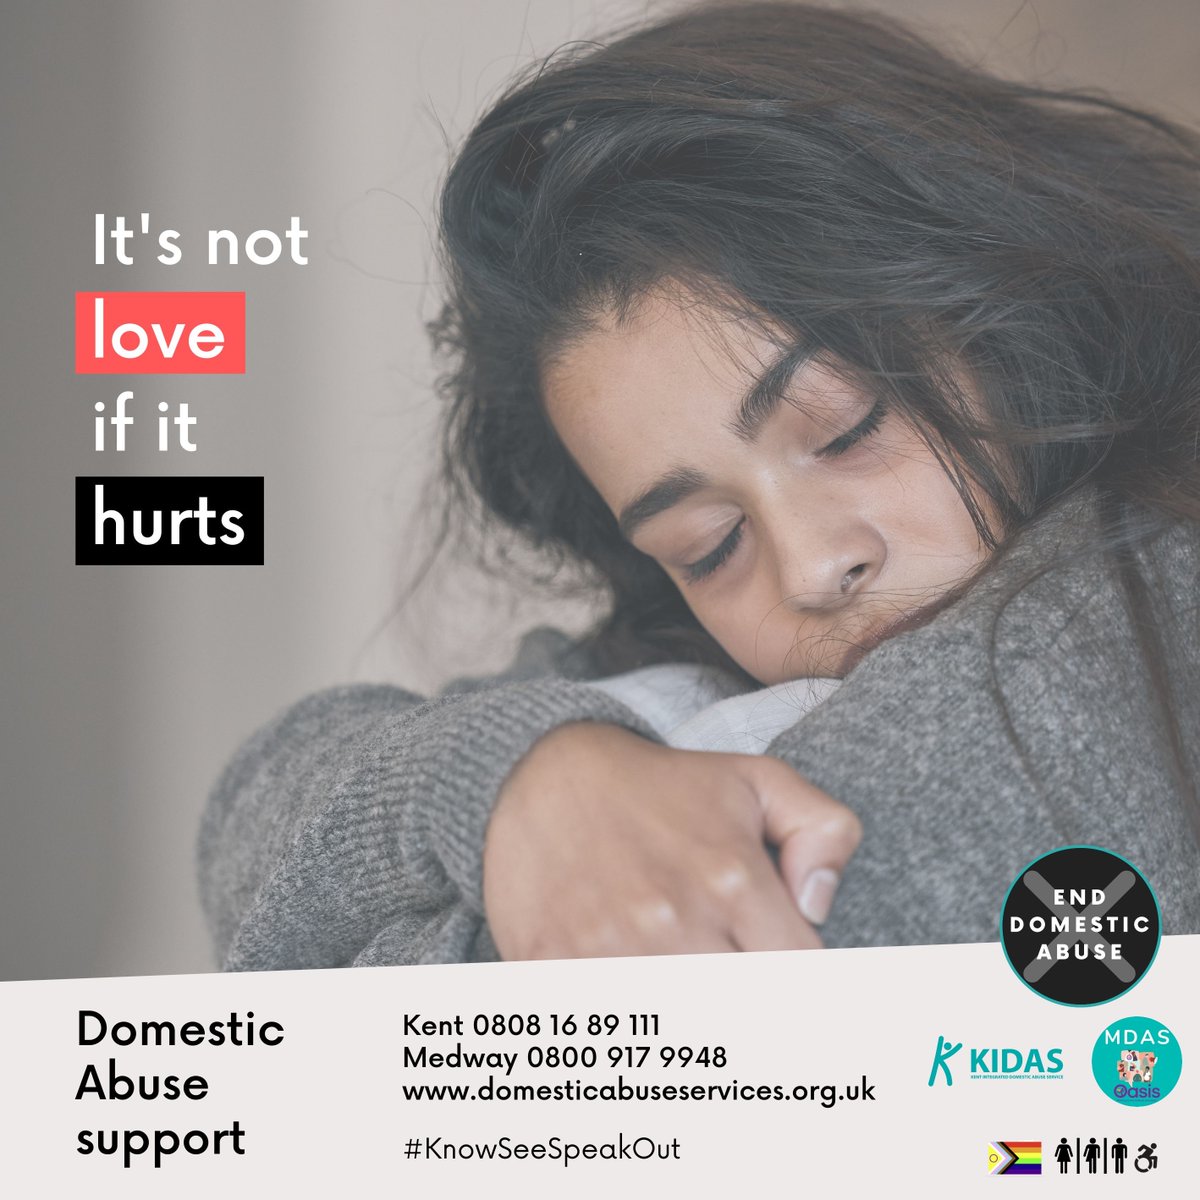 Everyone deserves healthy love. Whether you mark #ValentinesDay or not, love should never hurt. If it does, you may be experiencing domestic abuse. Support is available. domesticabuseservices.co.uk #KnowSeeSpeakOut #EndDomesticAbuse #YouAreNotAlone #ValentinesDay #DomesticAbuse